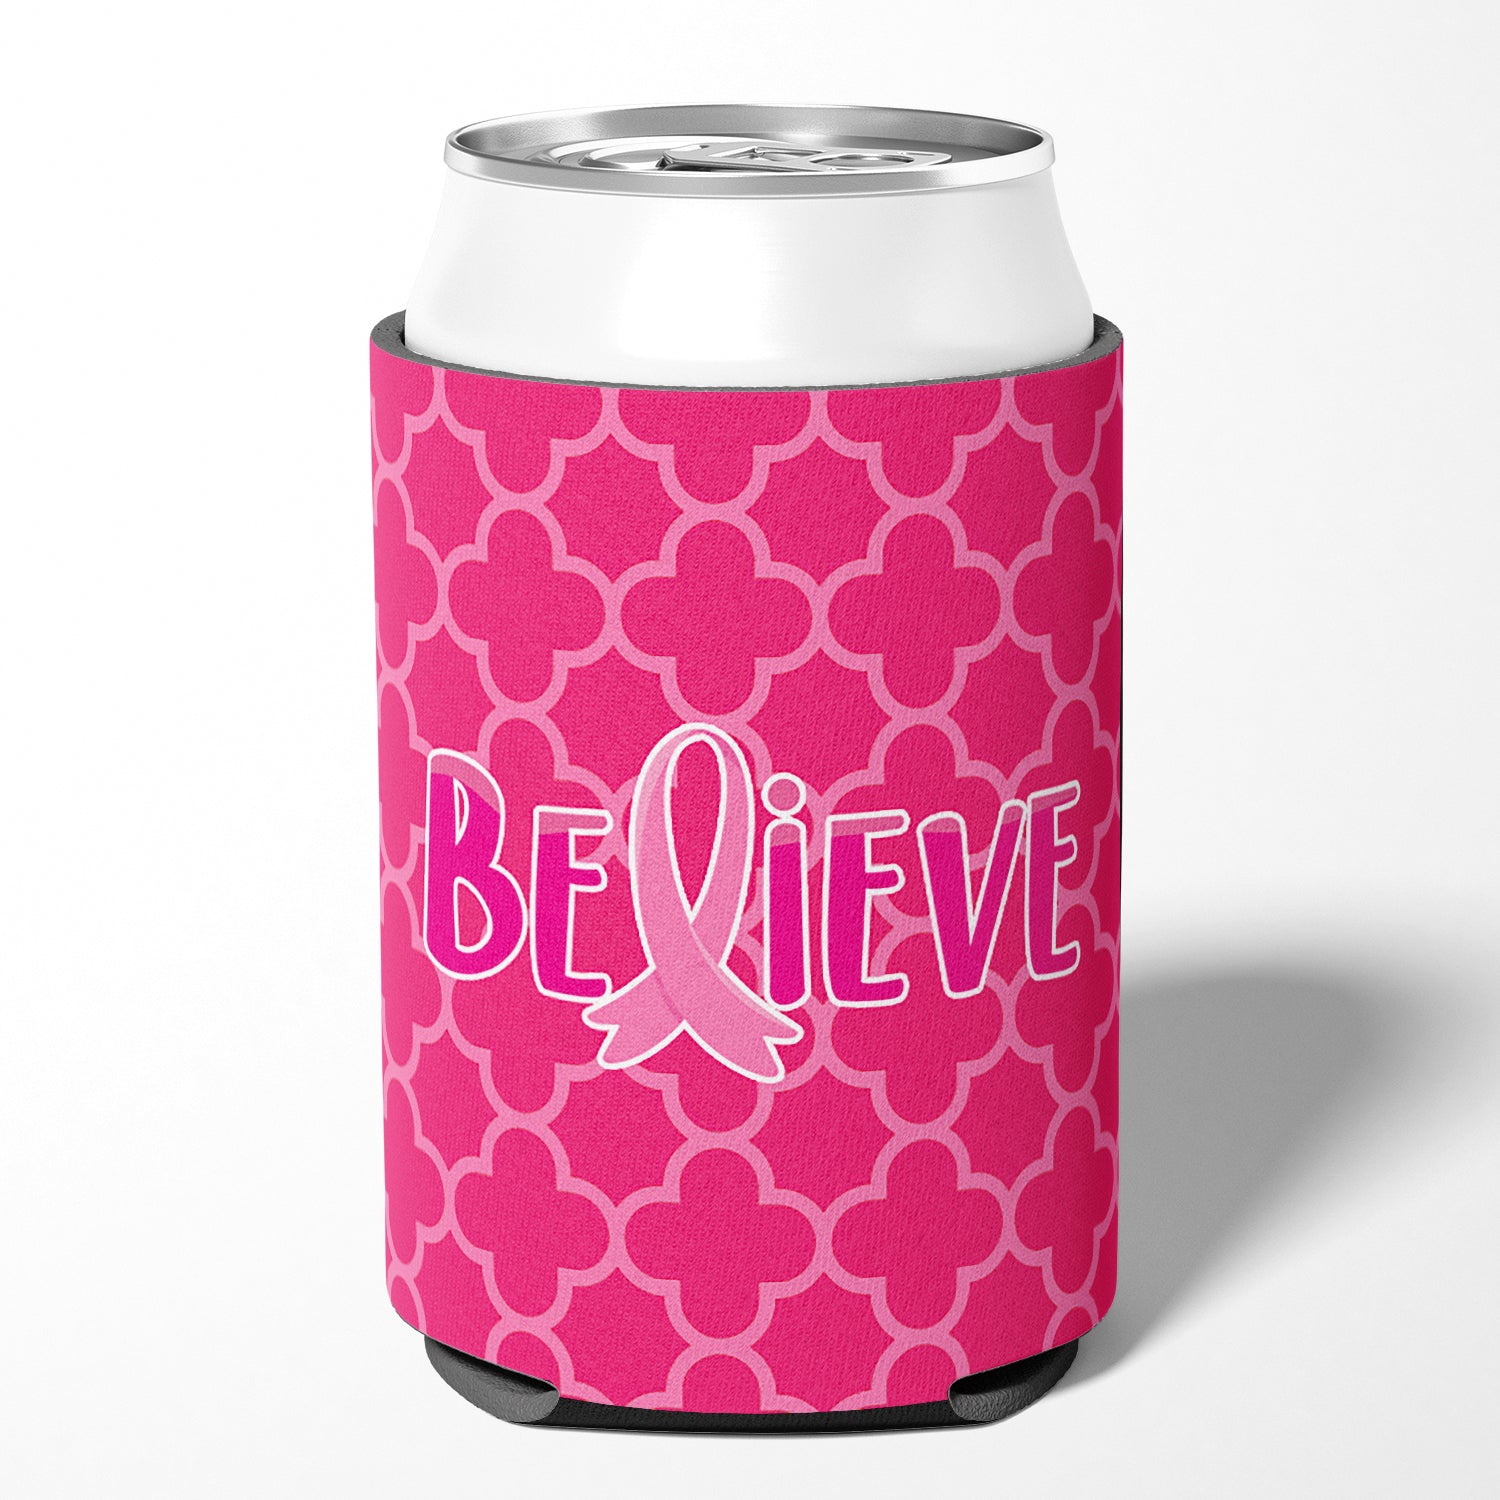 Breast Cancer Awareness Ribbon Believe Can or Bottle Hugger BB6980CC